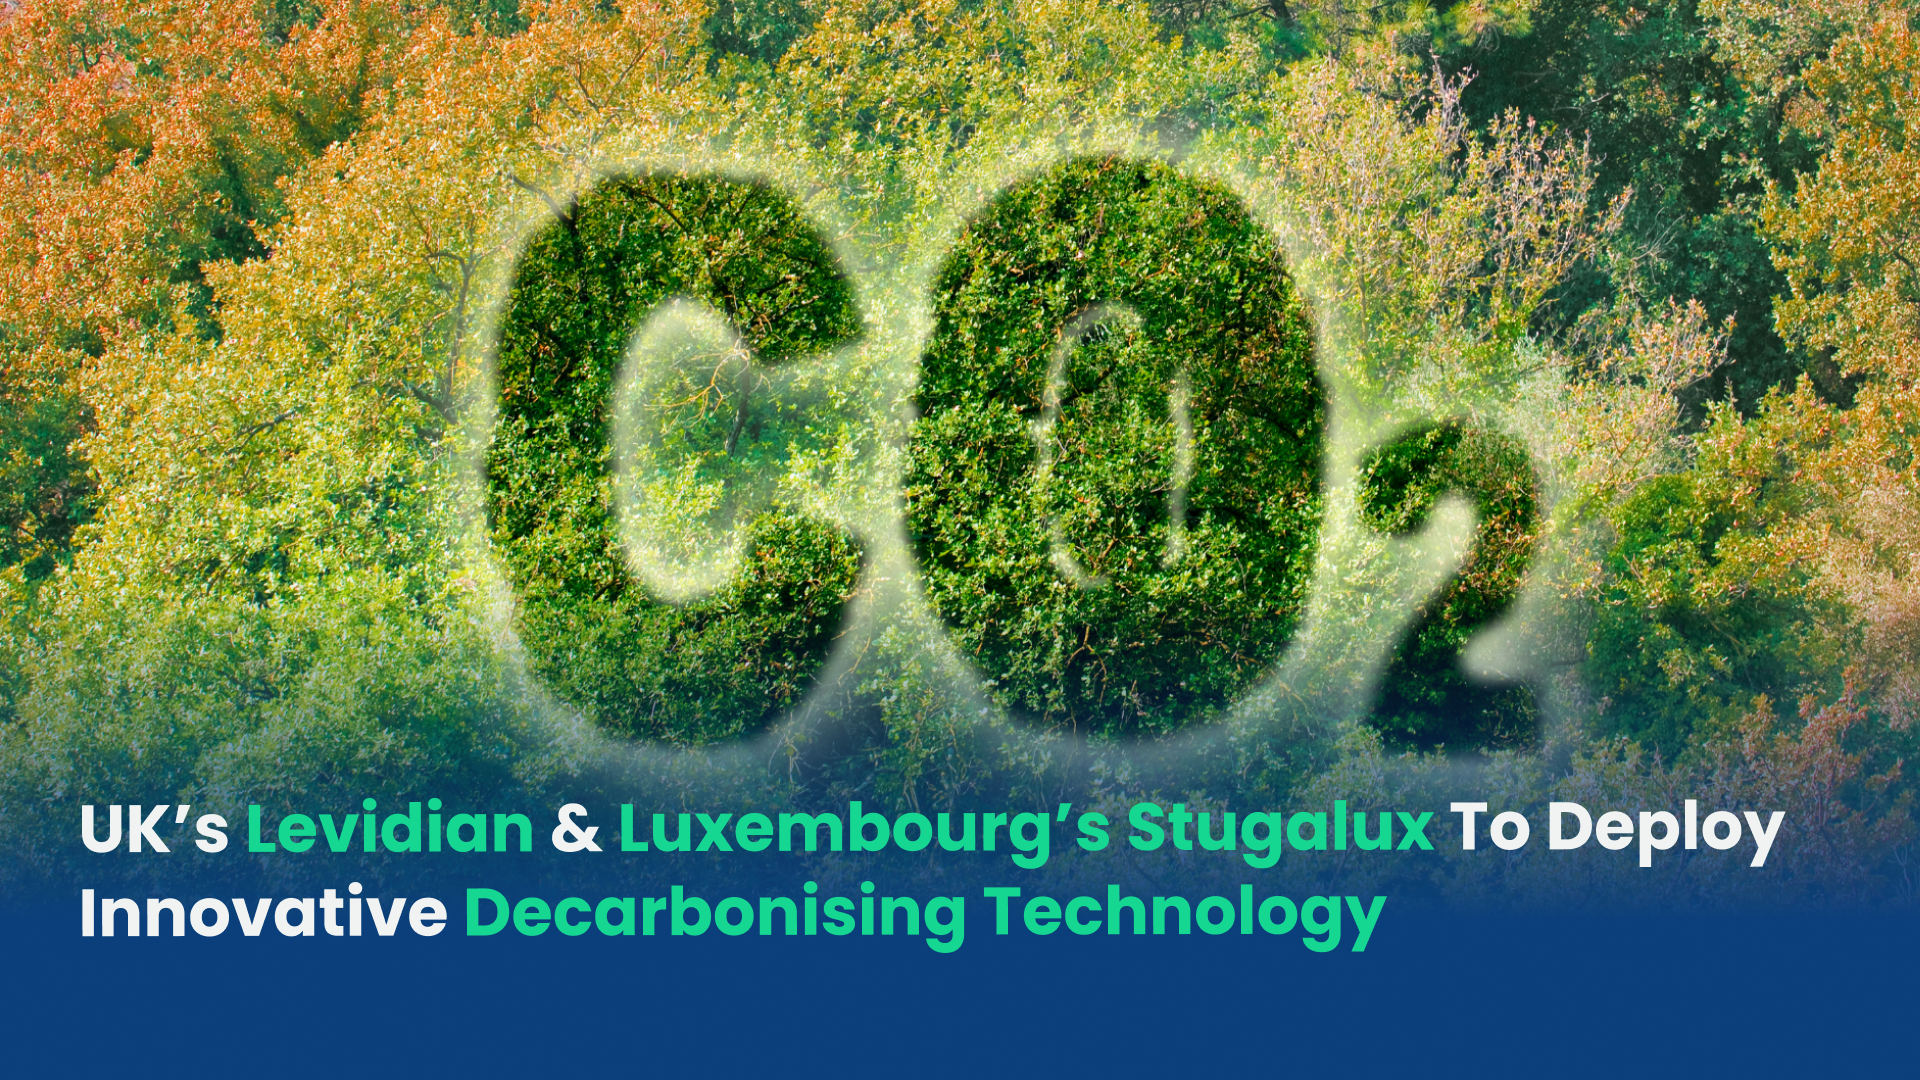 UK’s Levidian & Luxembourg’s Stugalux To Deploy Innovative Decarbonising Technology